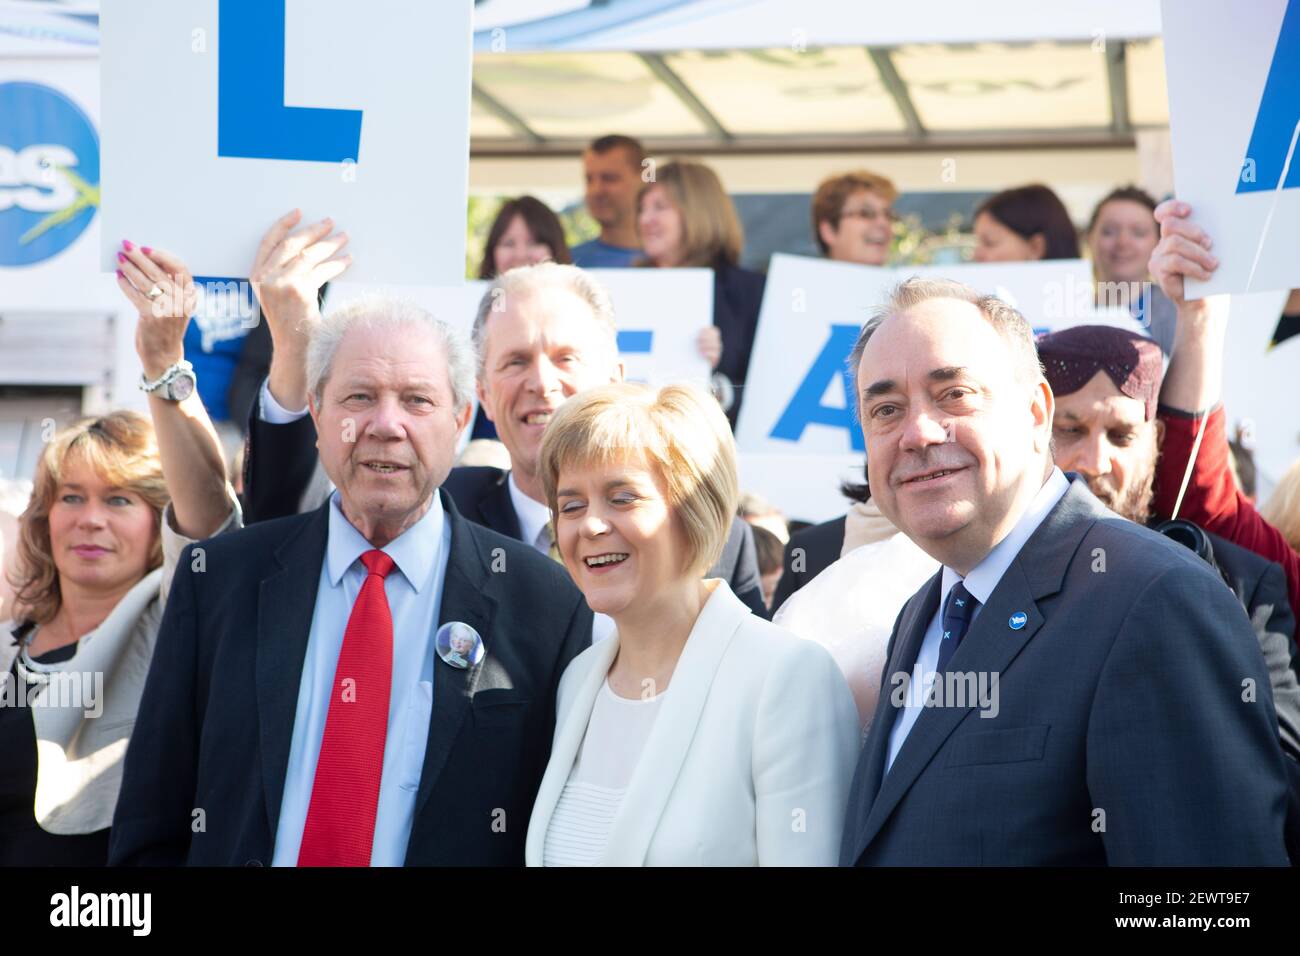 Edinburgh, Scotland. 10 September 2014. First Minister Alex Salmond and Deputy First Minister. Nicola Sturgeon join with figures from across the Yes m Stock Photo